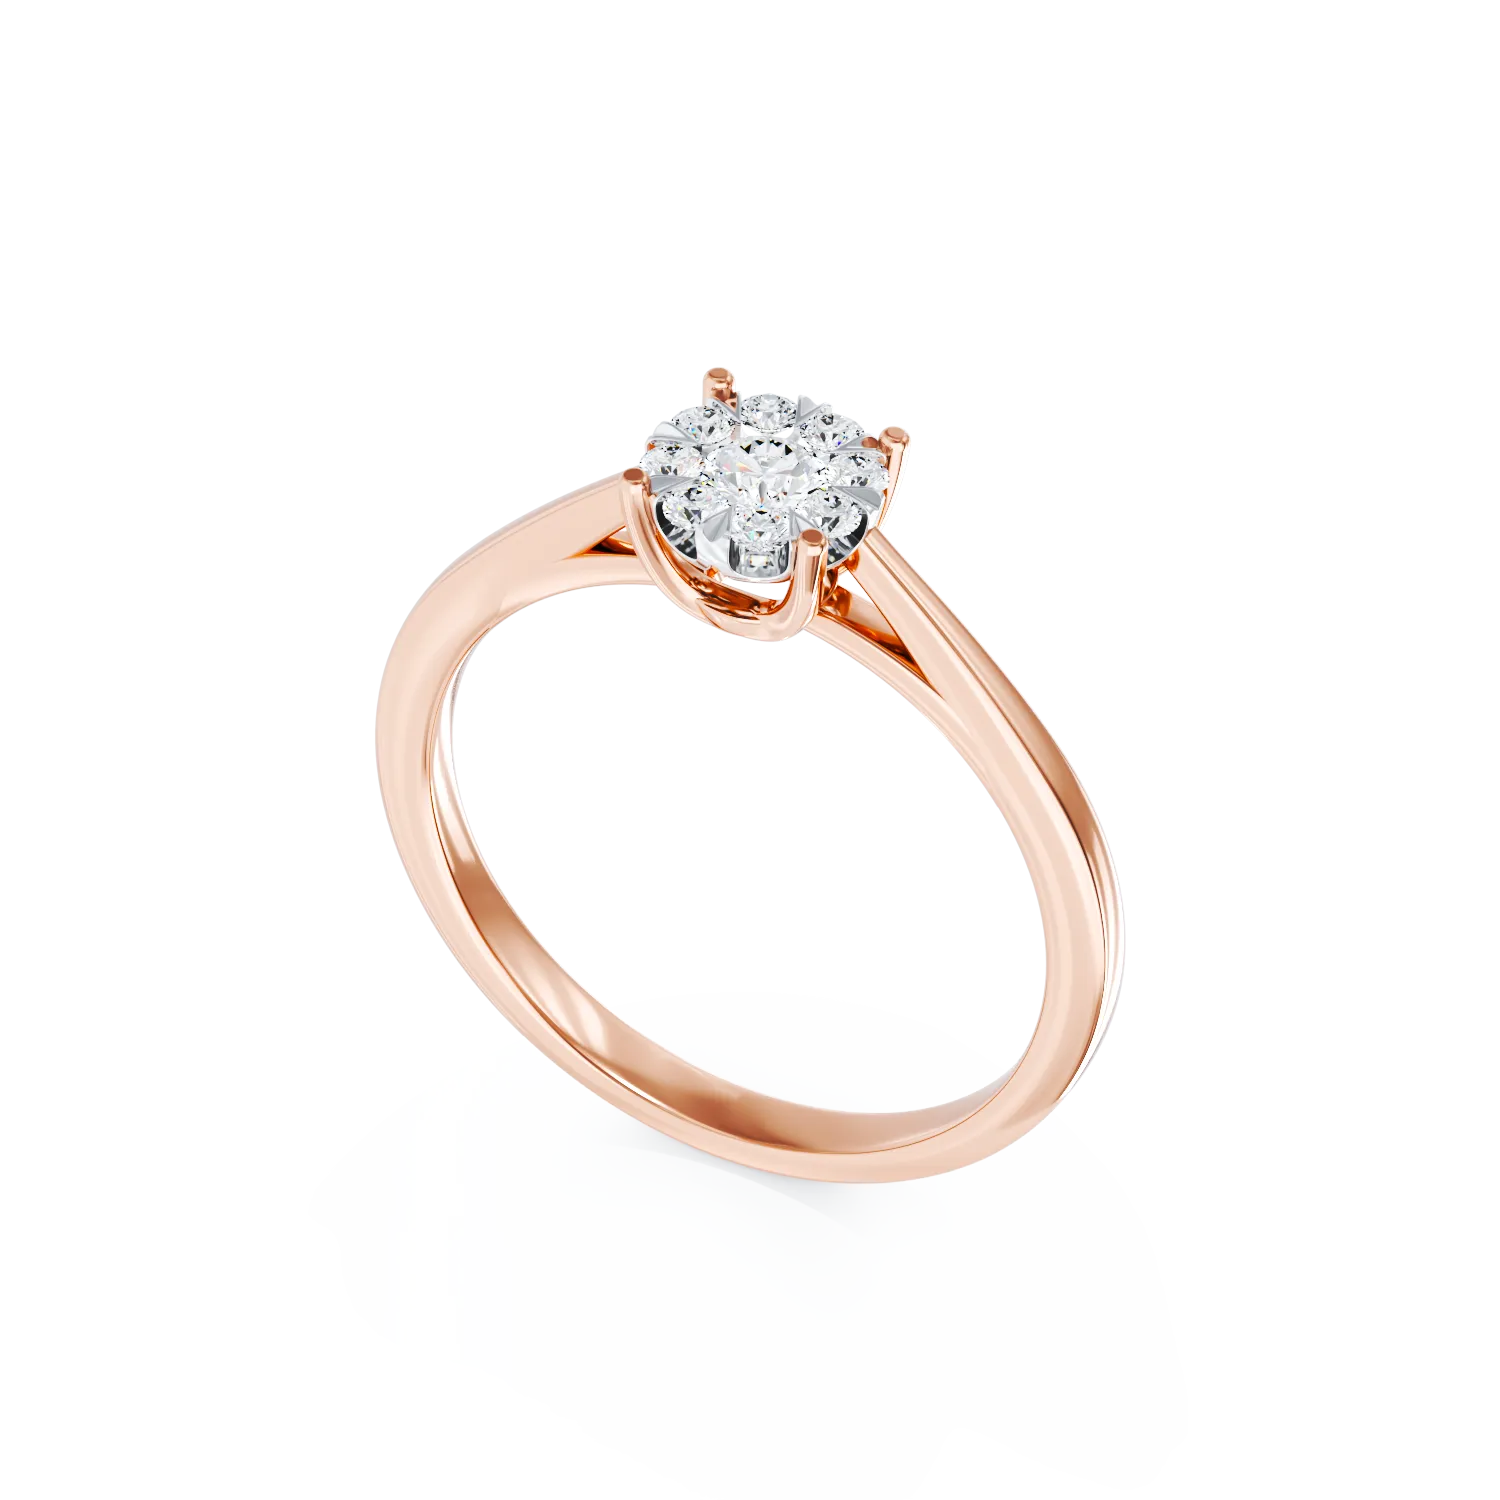 14K rose gold engagement ring with 0.104ct diamonds